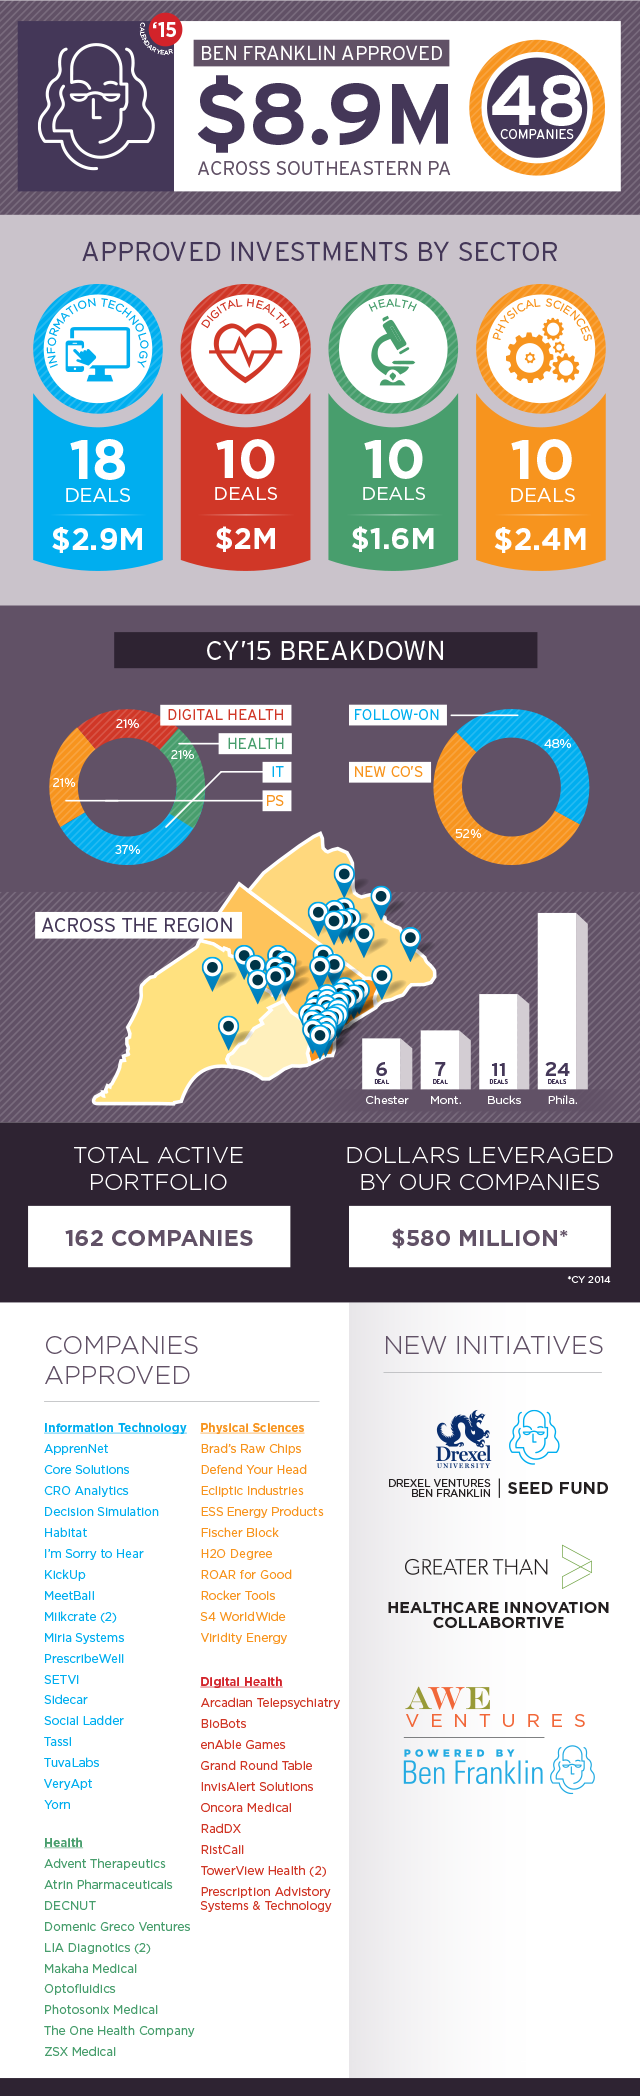 CY15-Wrap-Up-Ben-Franklin-Invests-Infographic